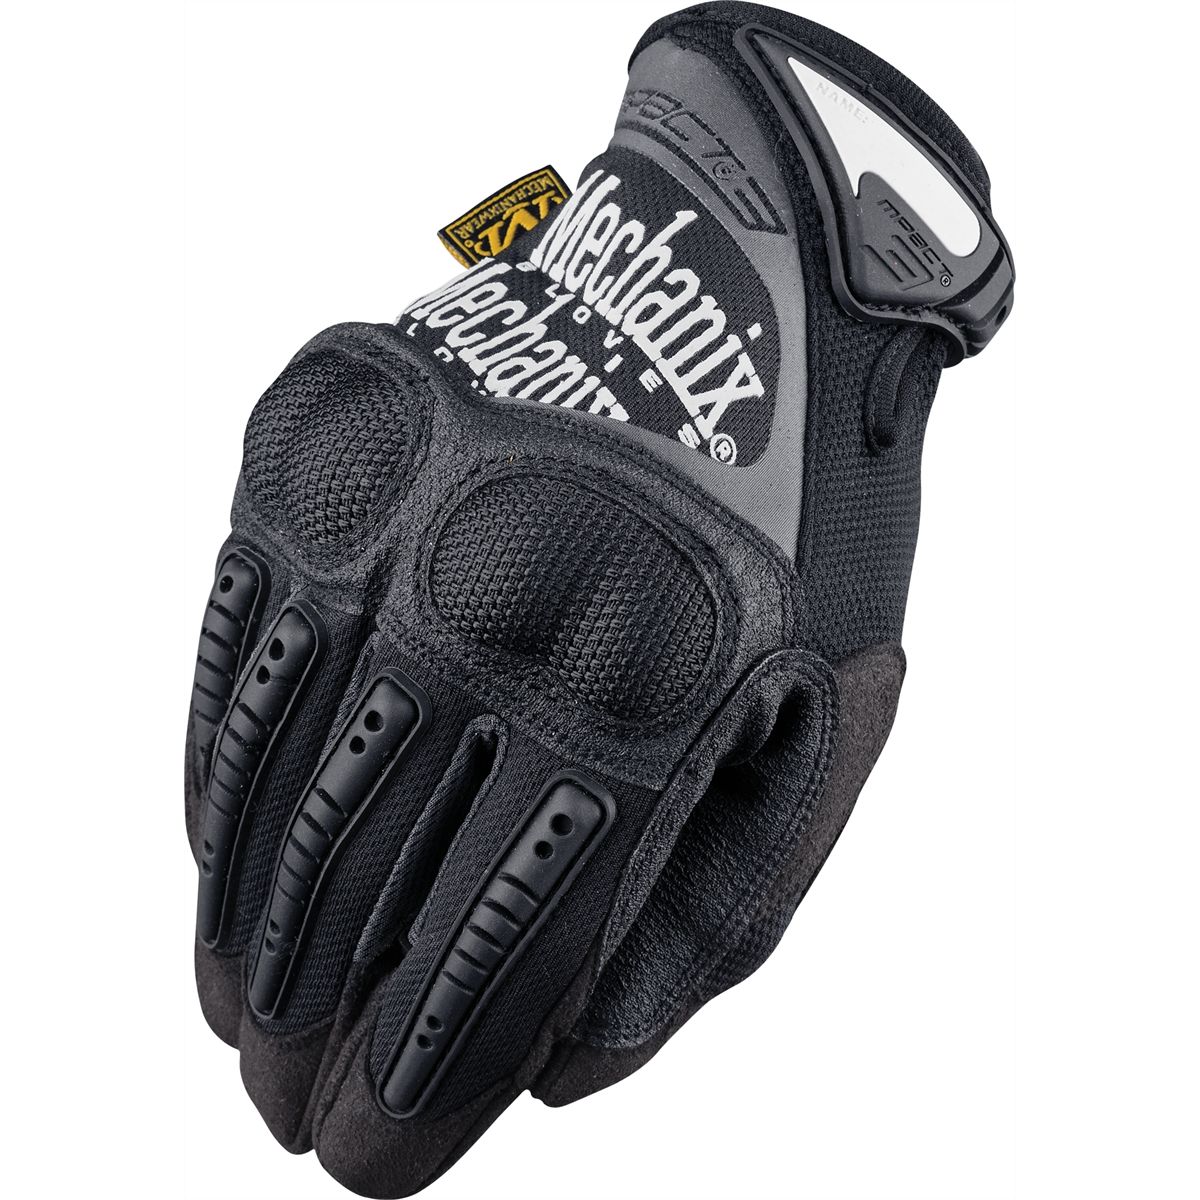 M-Pact 3 Glove - Large